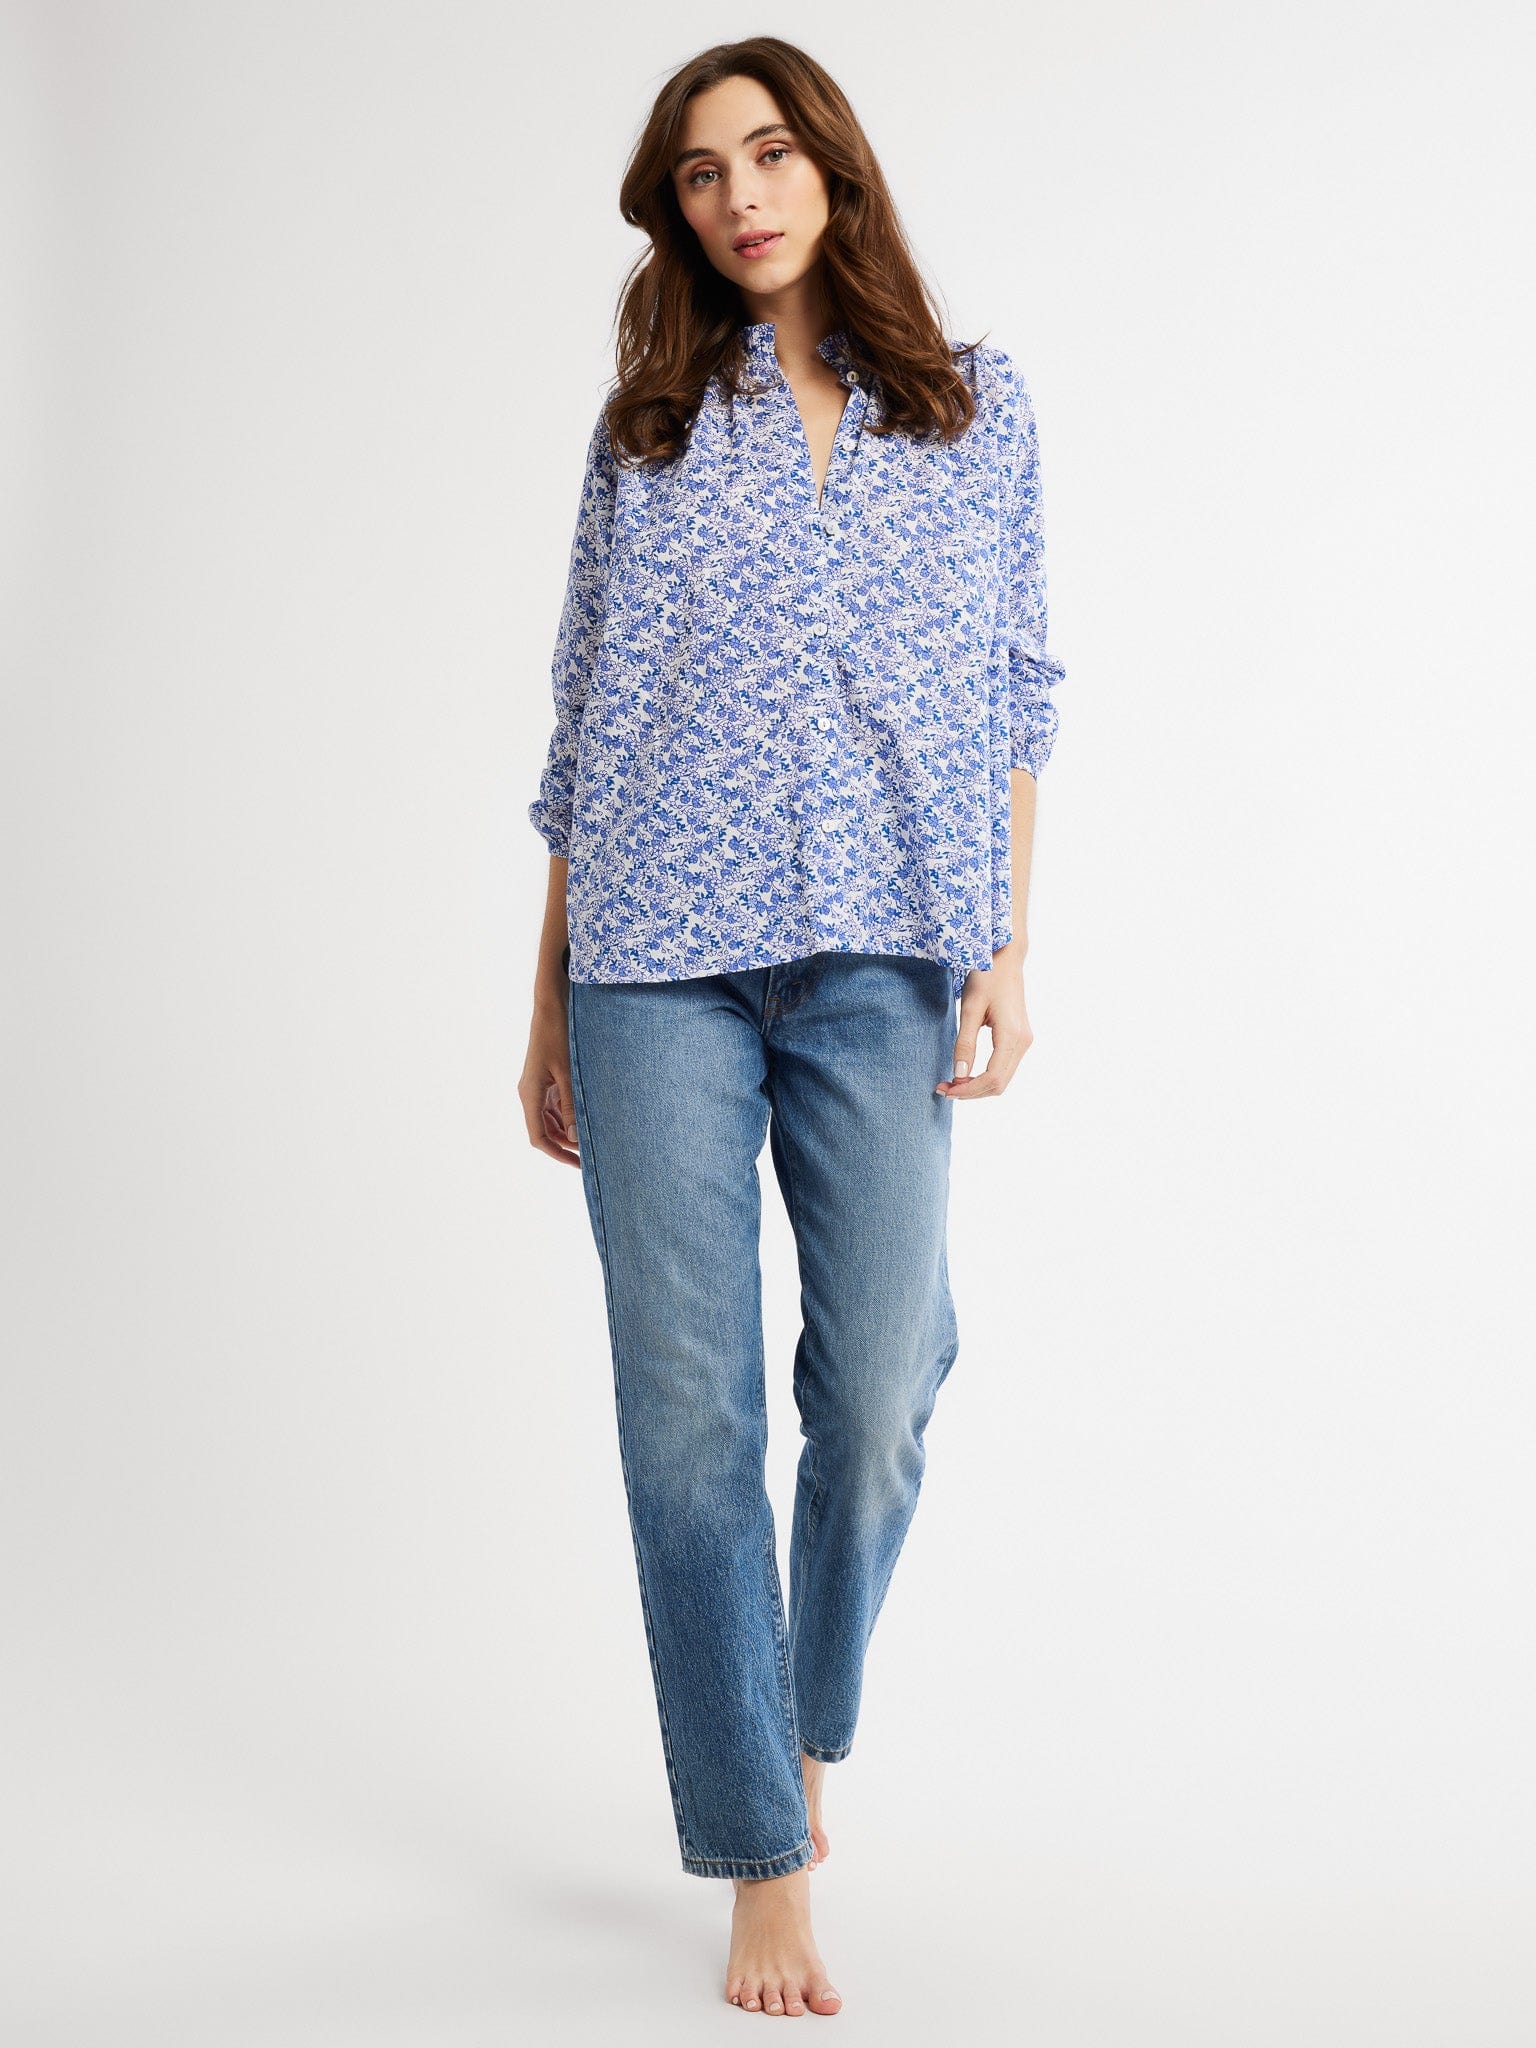 MILLE Clothing Francesca Top in Condesa Floral